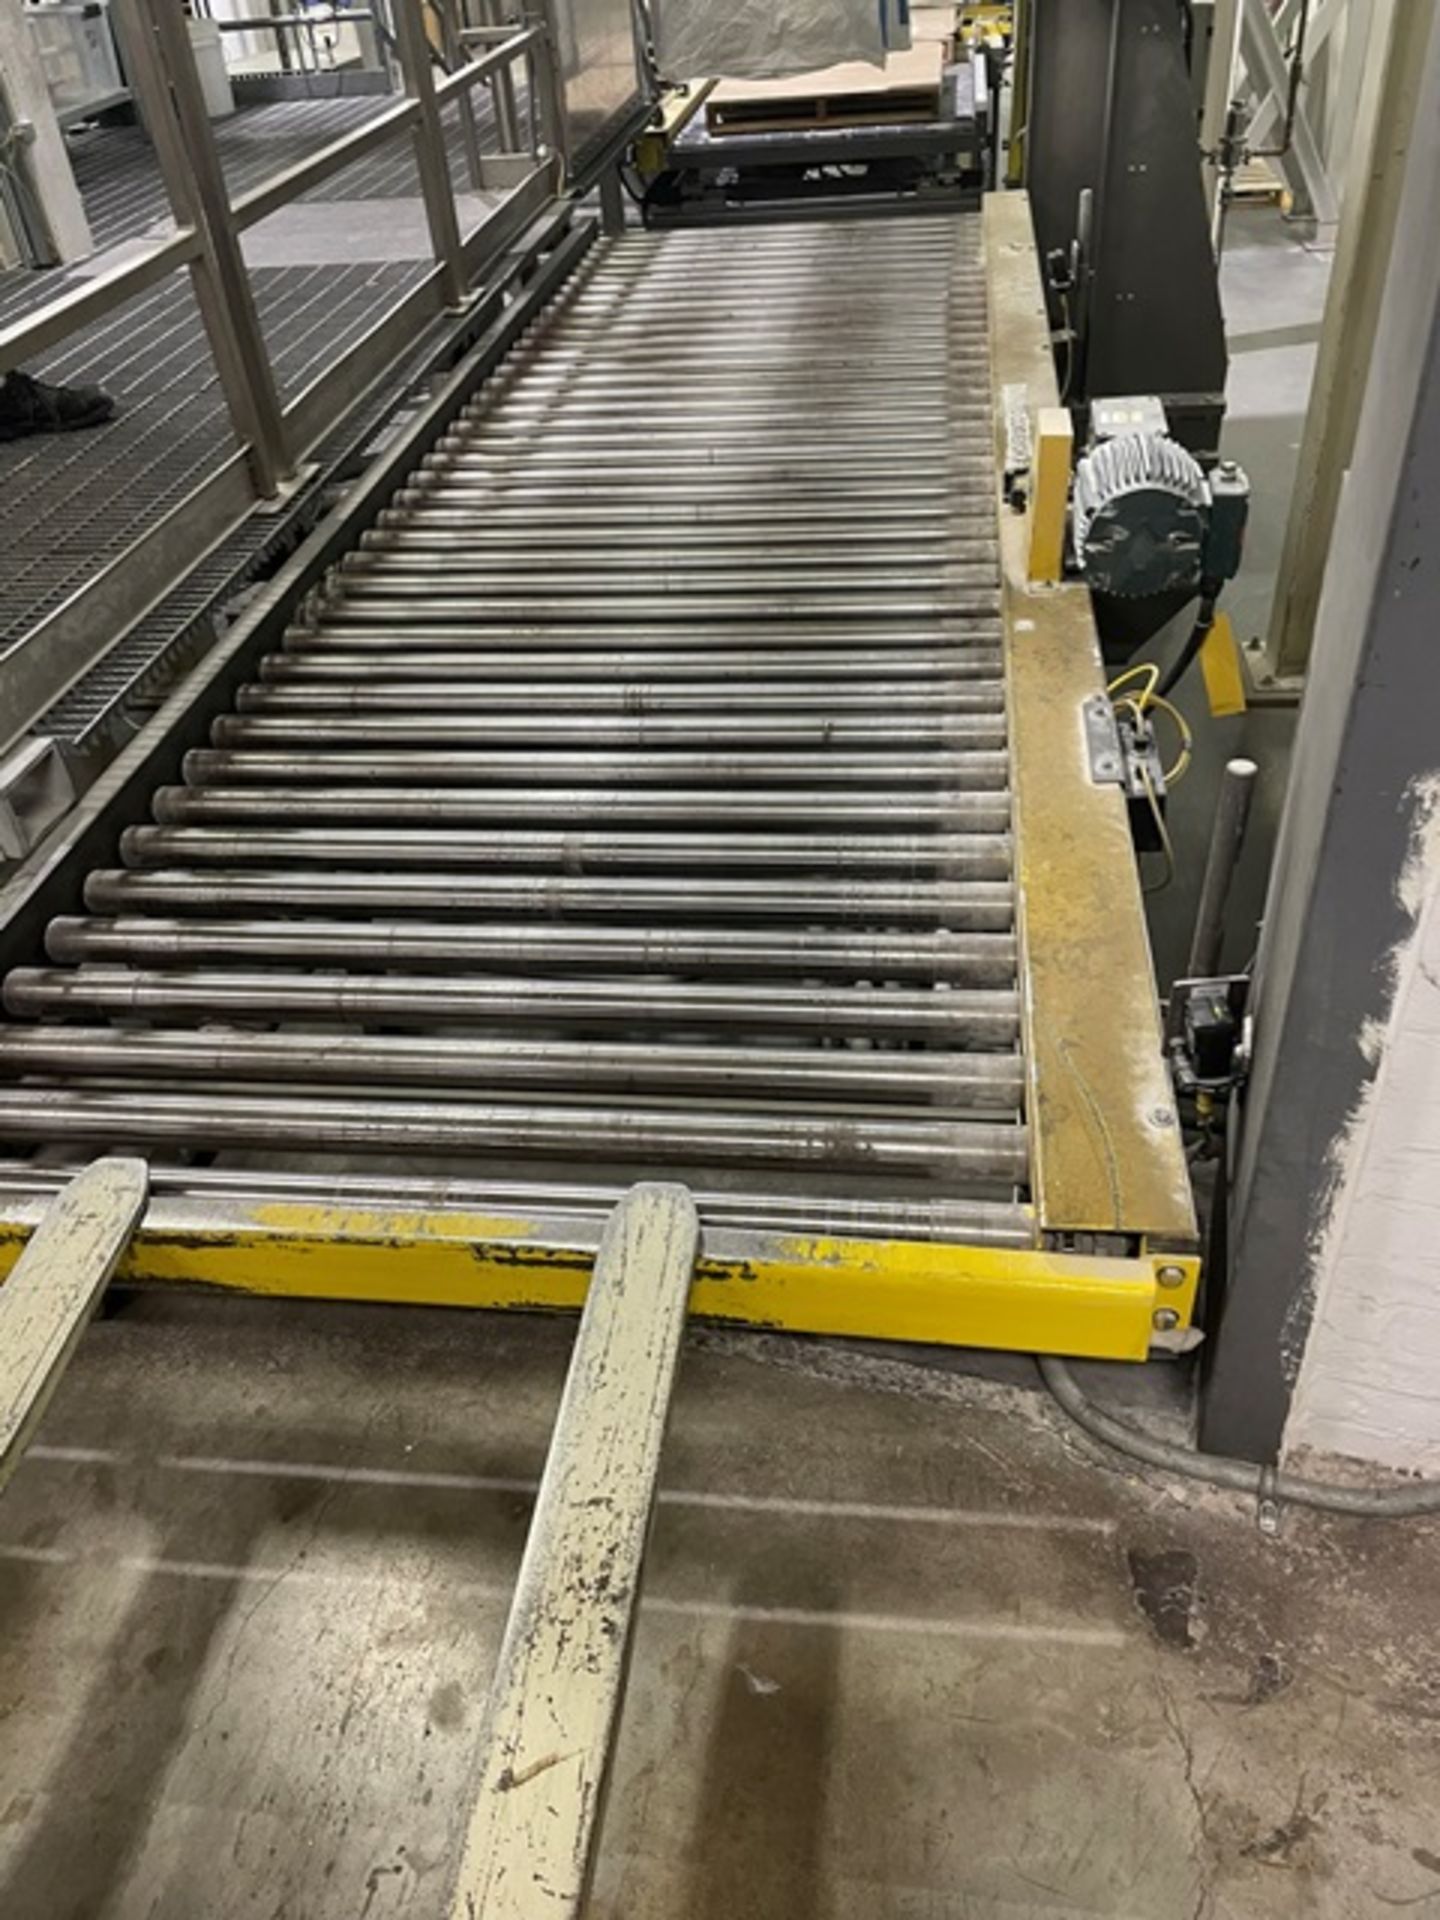 Motorized Roller Conveyor, Approx. 16' Length - Image 2 of 3